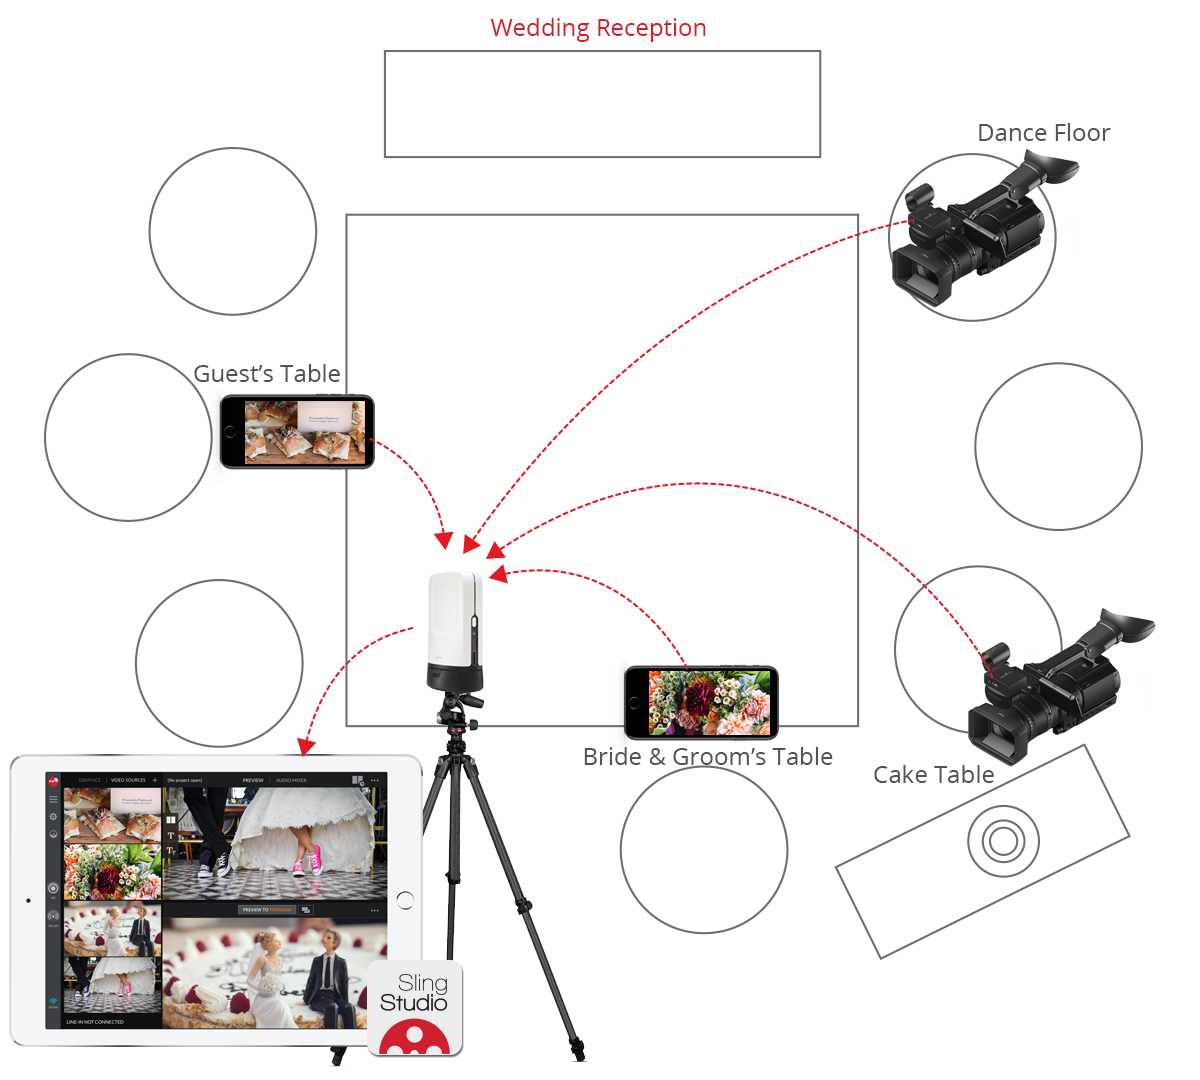 Diagram on how to live stream                                                                            wedding receptions for professional                                                                            videographers with SlingStudio